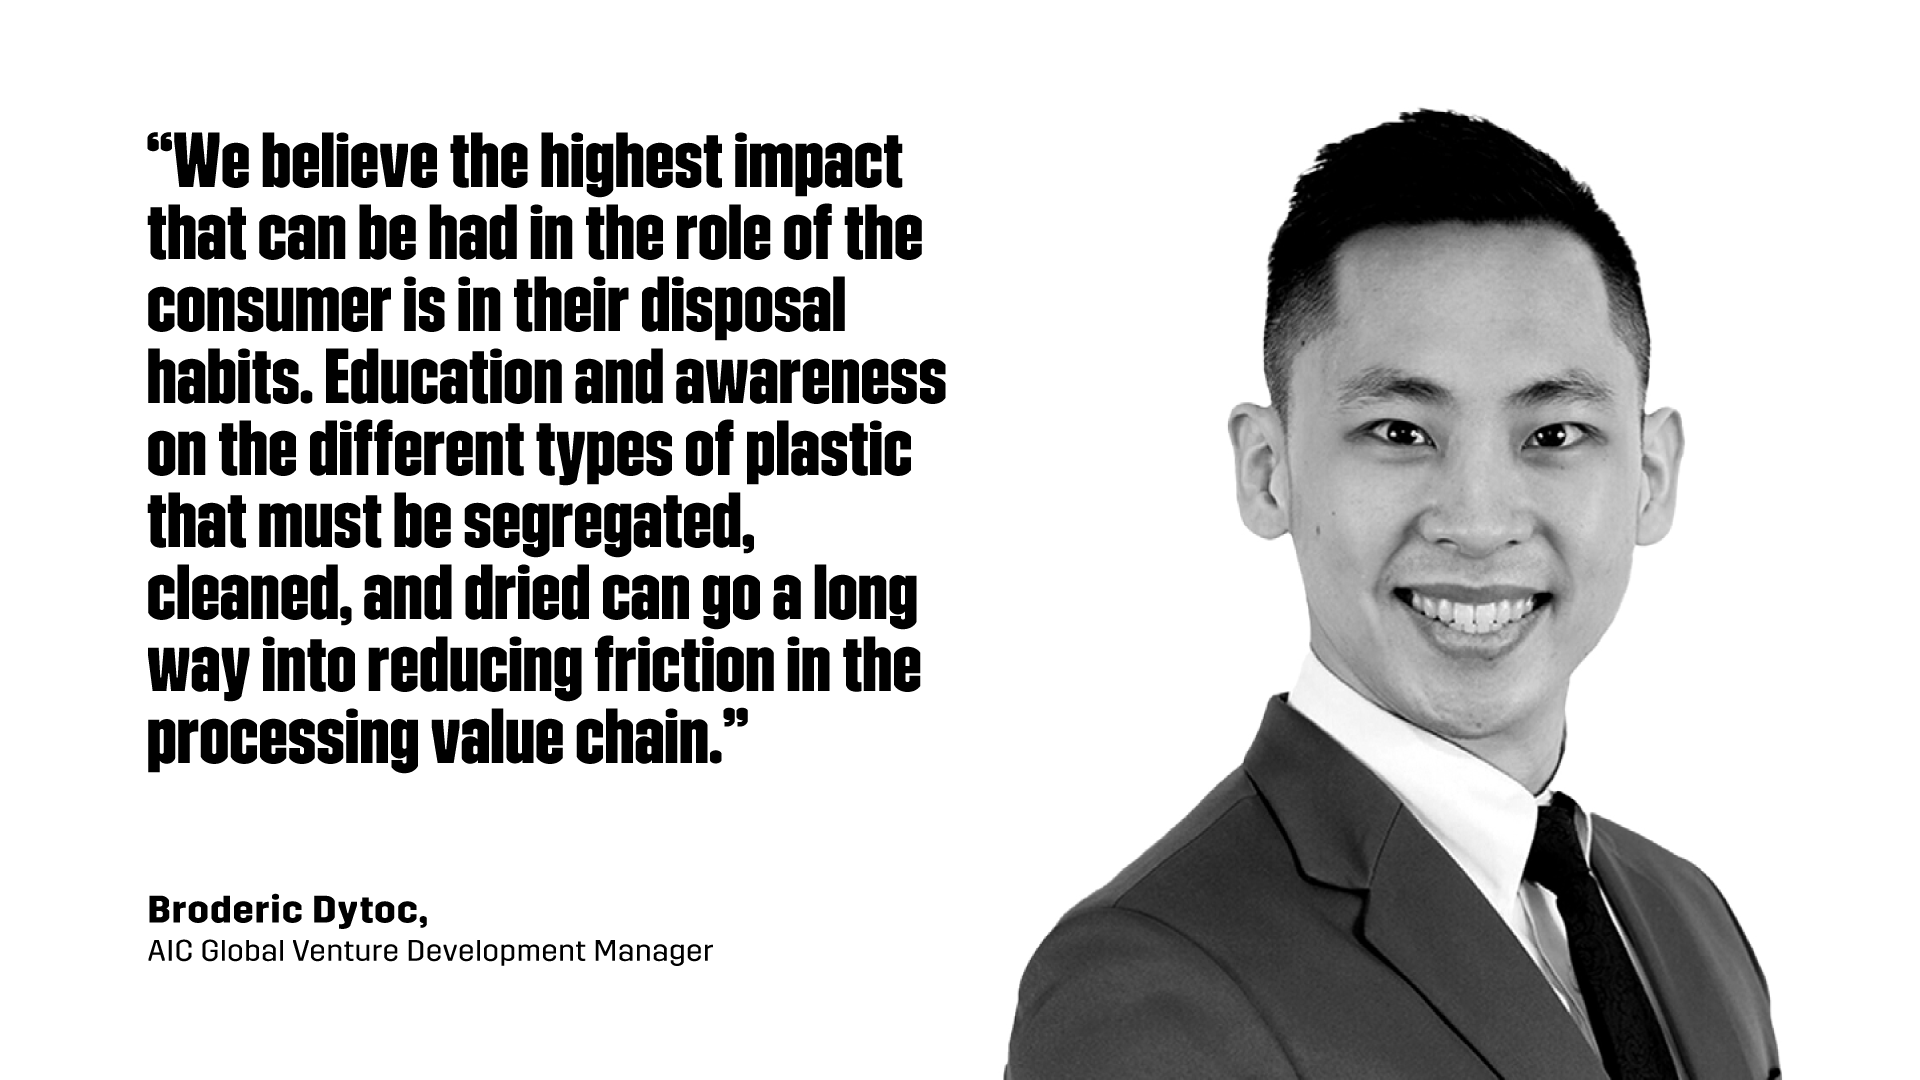 Broderic Dytoc, AIC Global Venture Development Manager